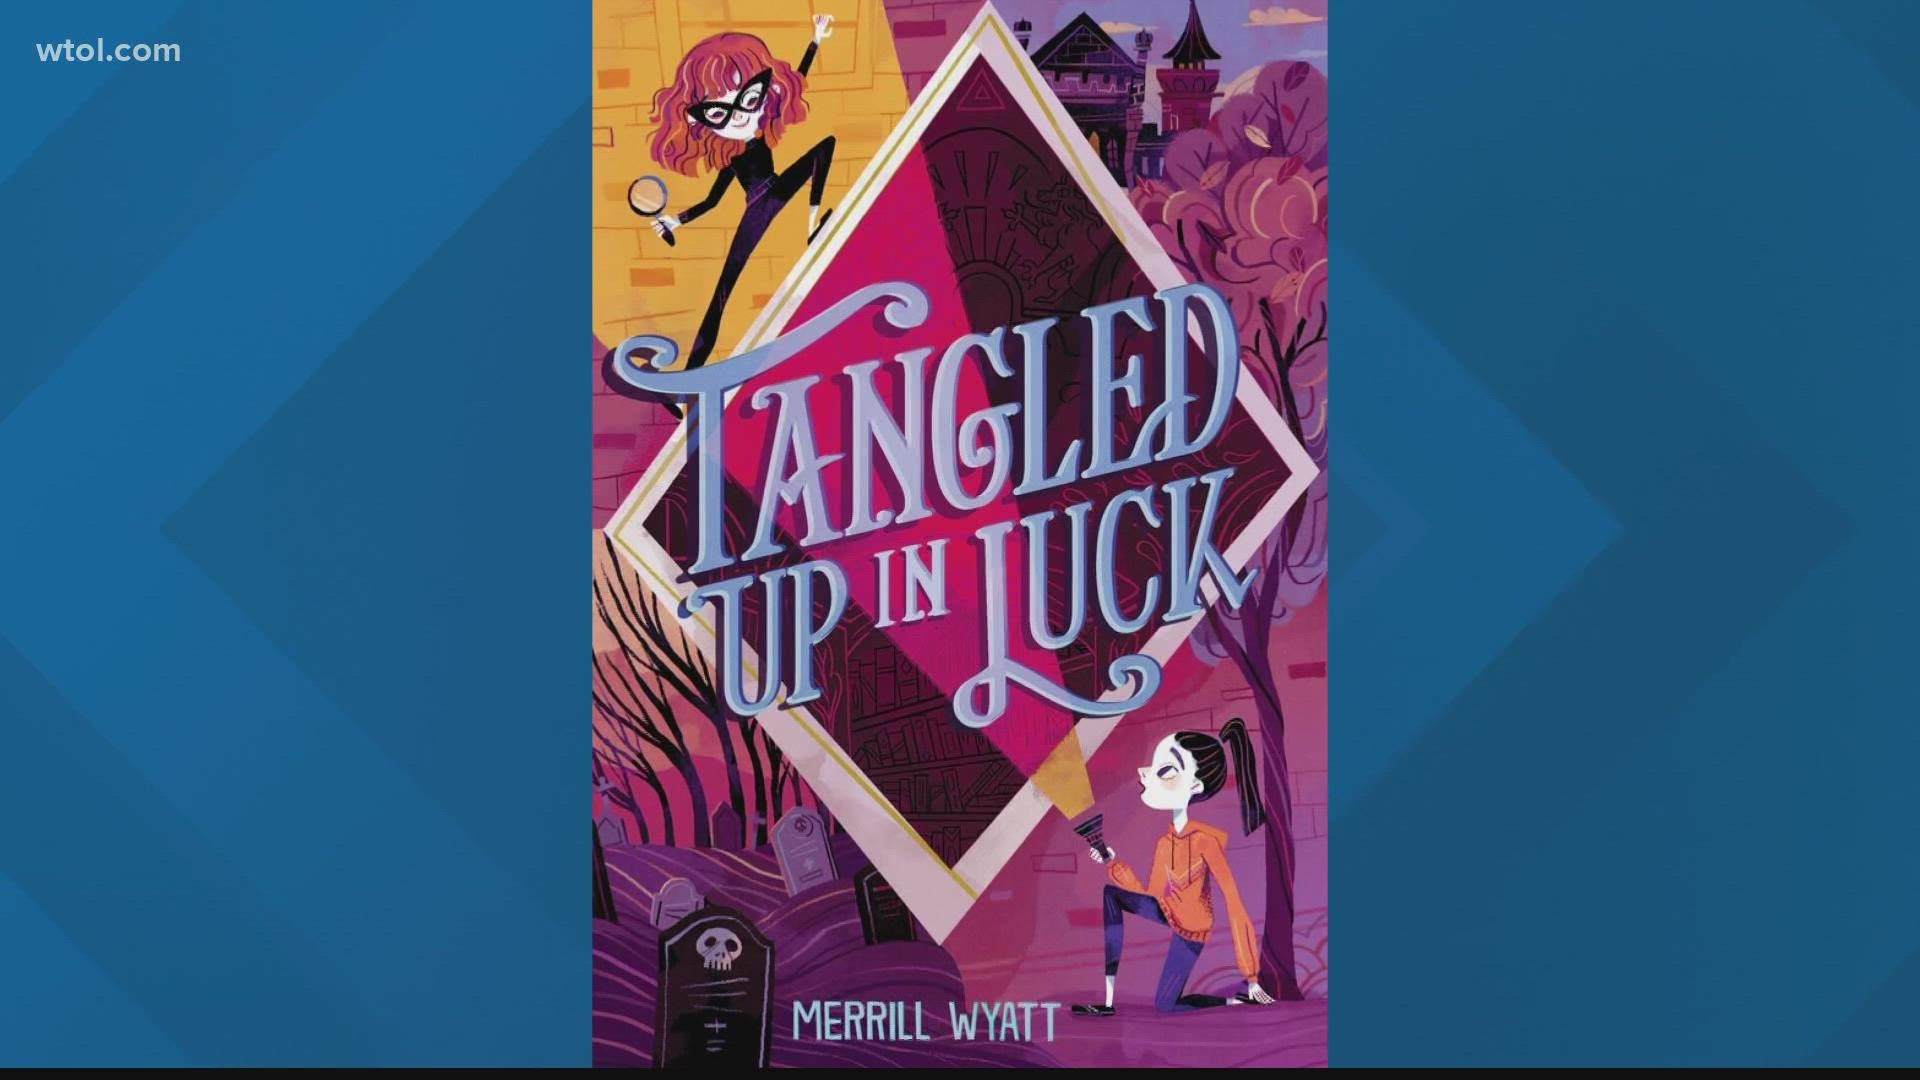 Amy Merrill-Wyatt's YA book "Tangled up in Luck" is set in Wauseon. She says the next book in the series will be set in Toledo.